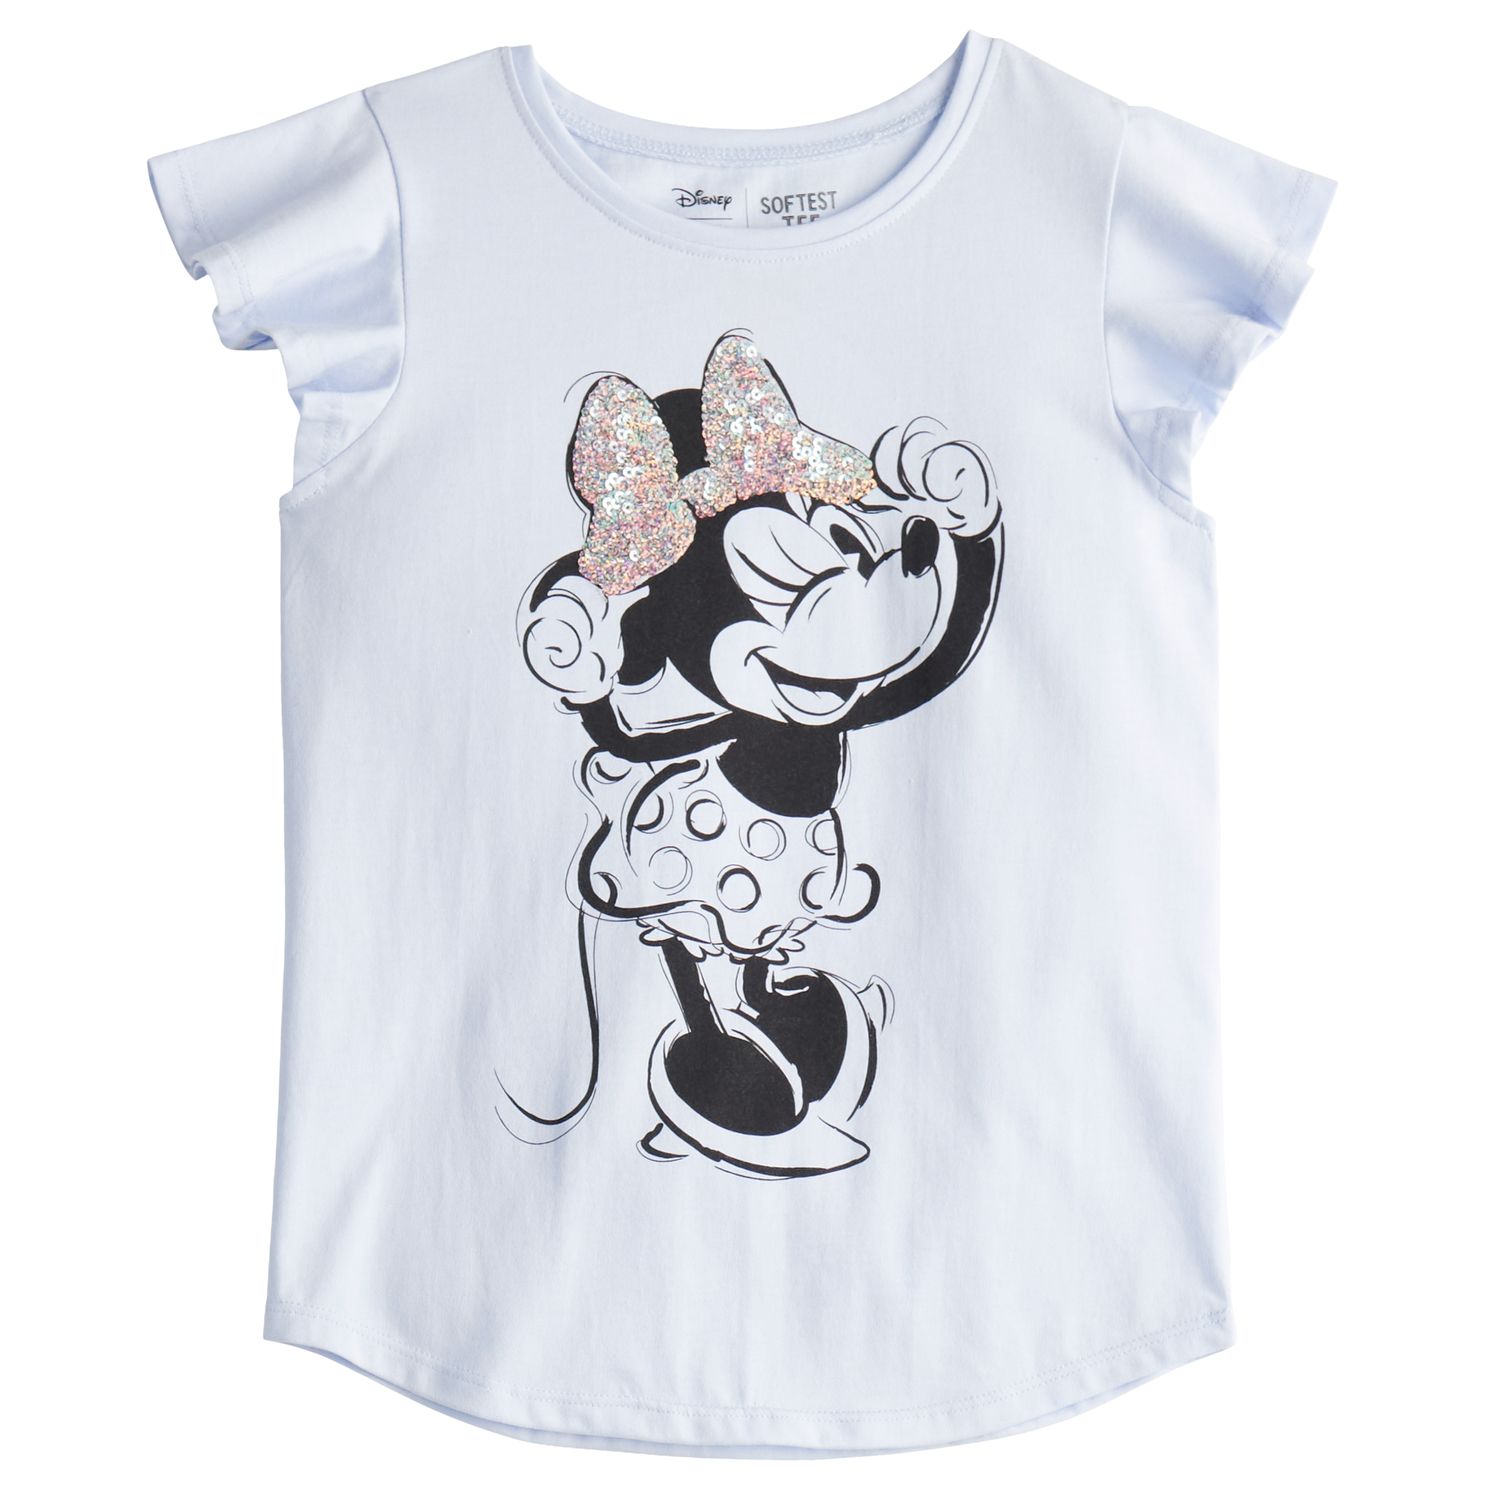 Image for Disney/Jumping Beans Disney's Minnie Mouse Toddler Girl Flutter Sleeve Tee by Jumping Beans® at Kohl's.